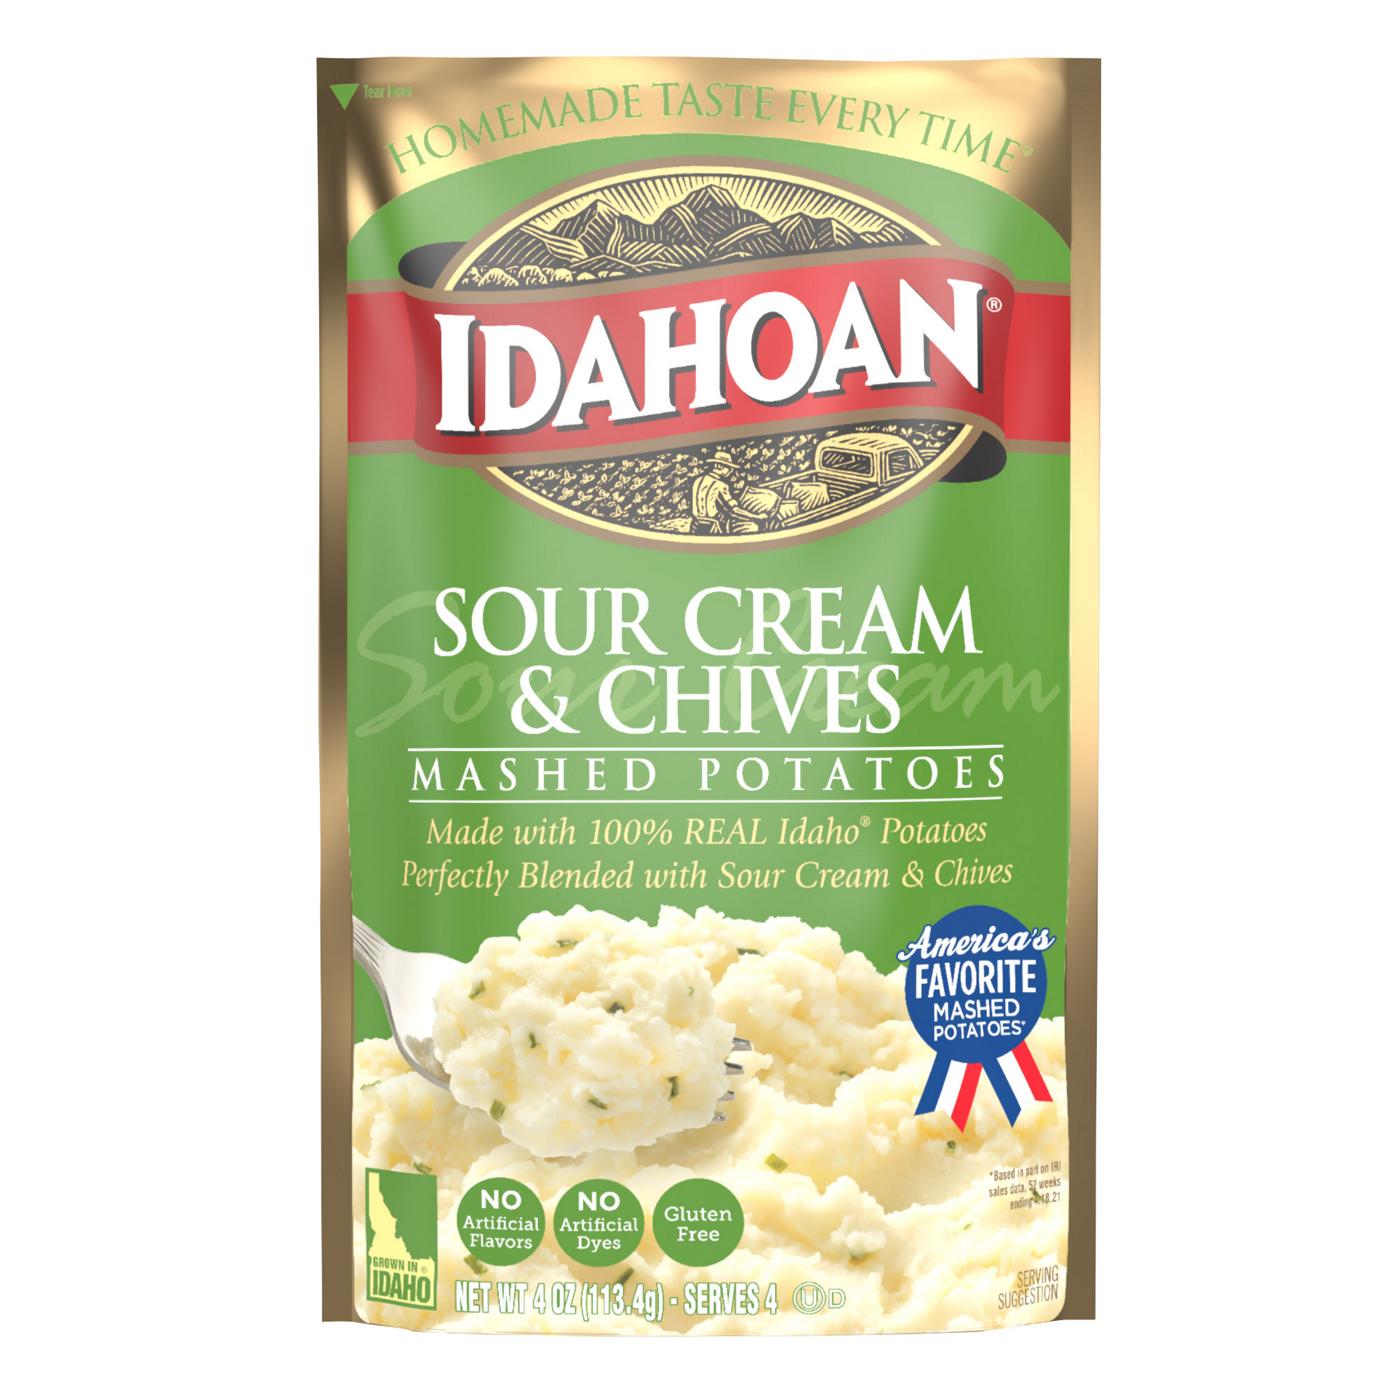 Idahoan Sour Cream and Chives Mashed Potatoes; image 1 of 4